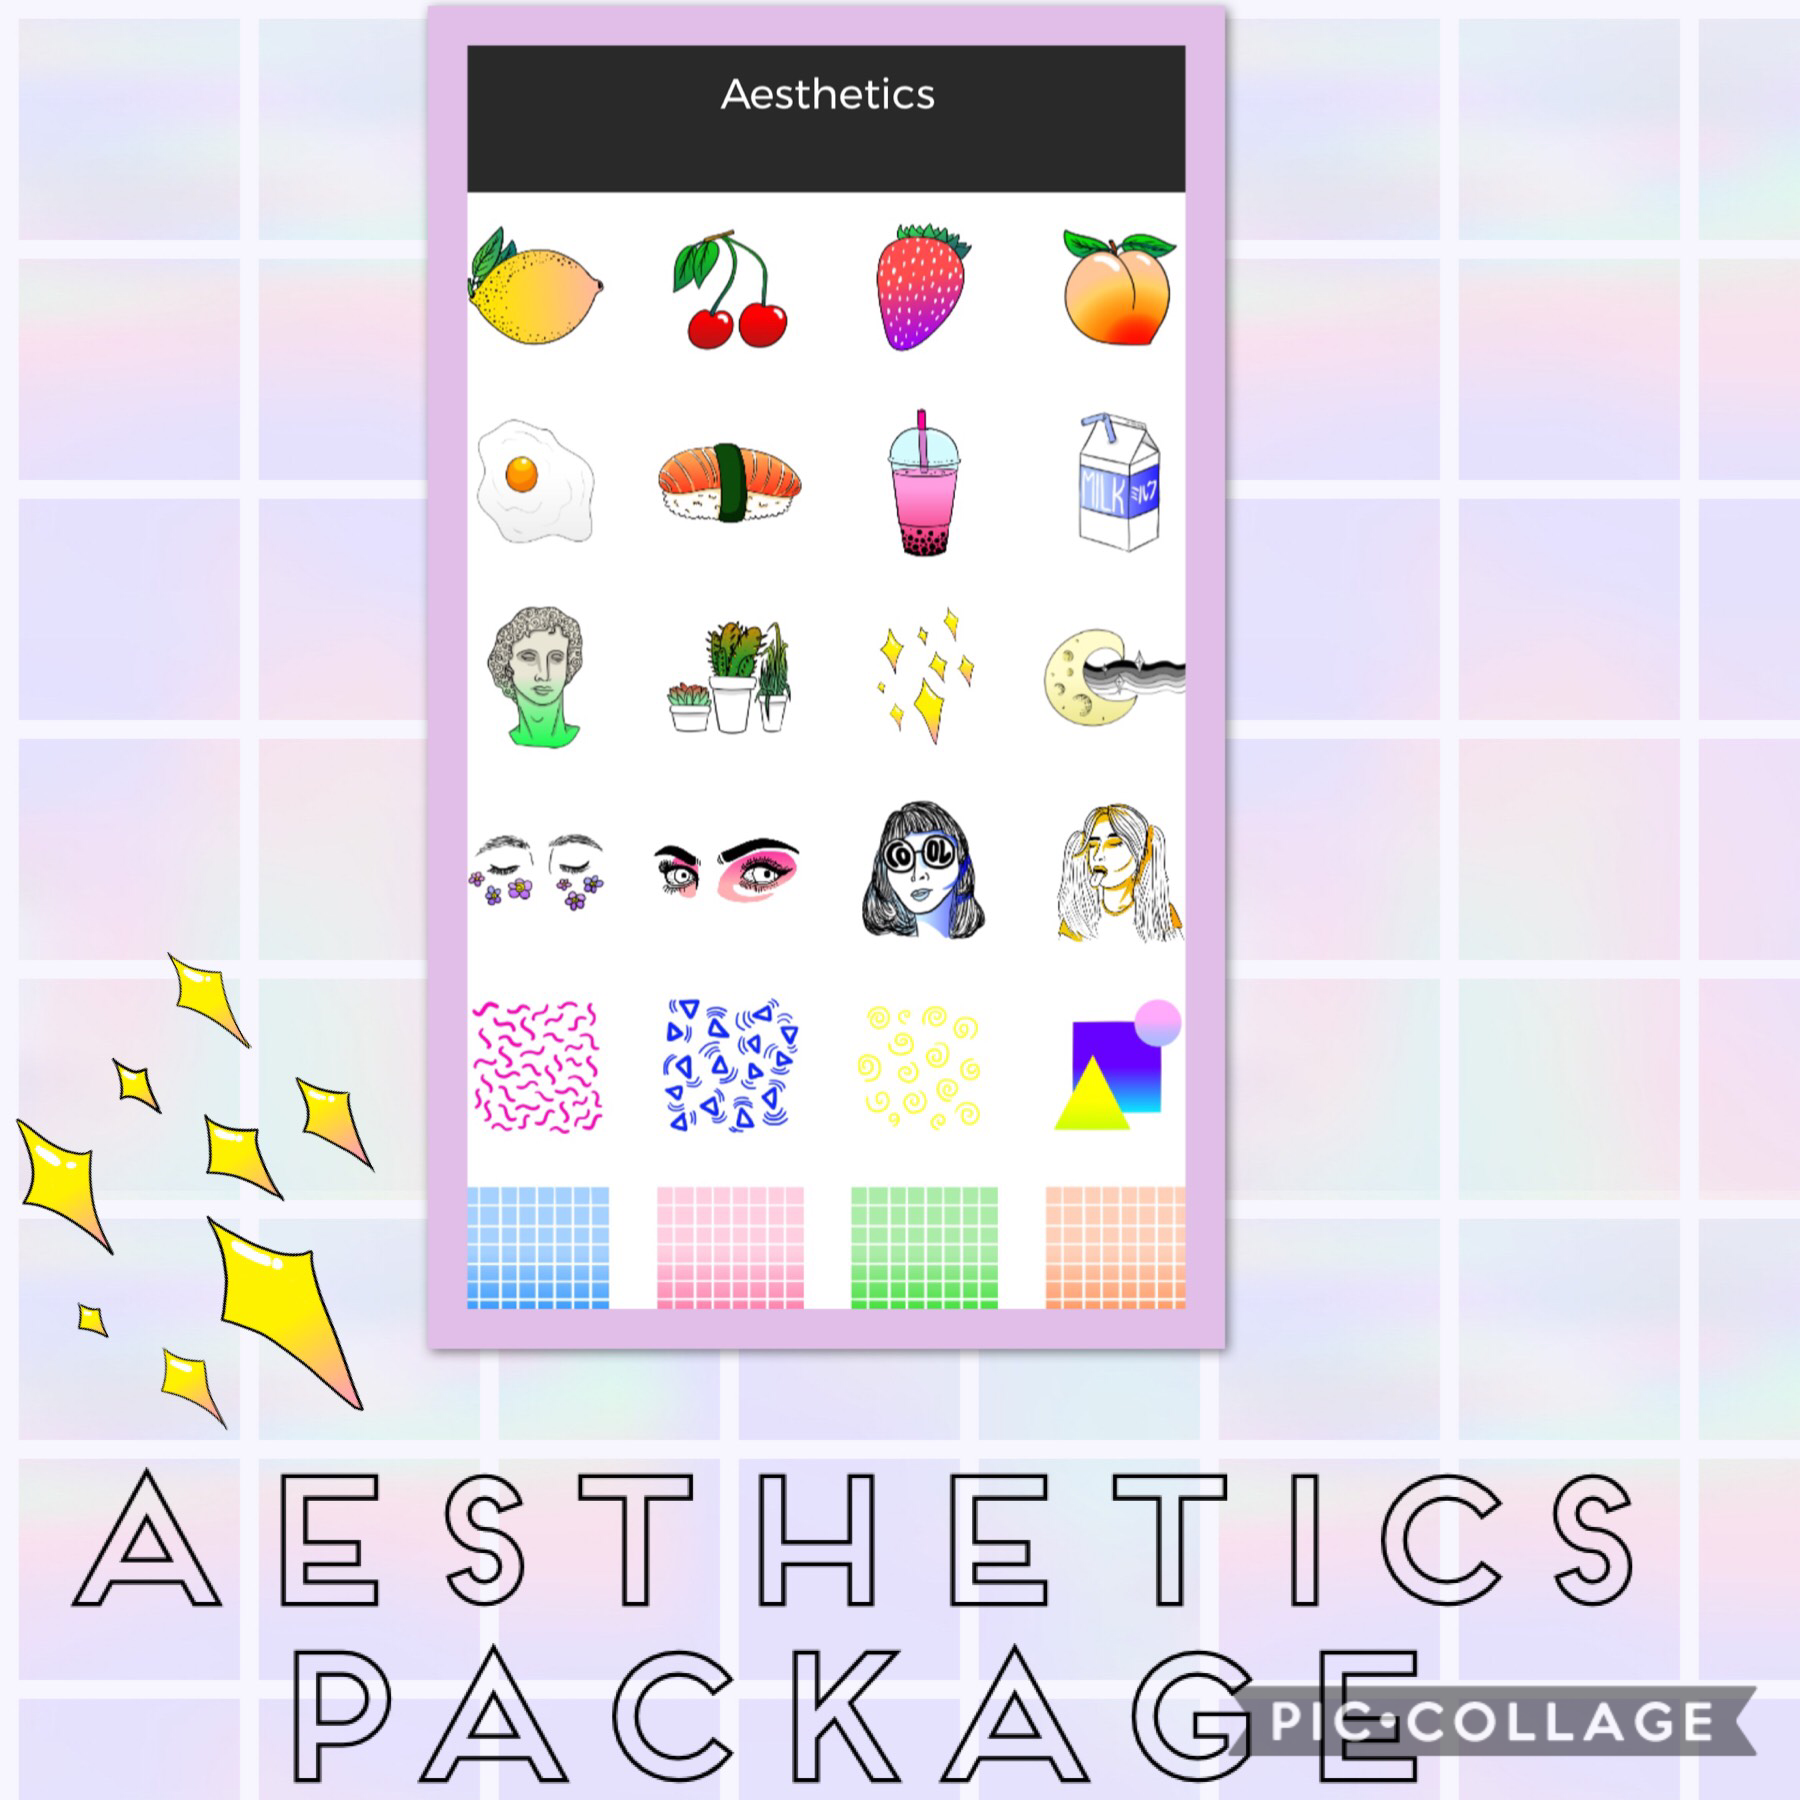 Buy this package with money or if your lucky for free!!!! Follow Pic_Collage_Thread_s for more sticker package reviews ❤️❤️